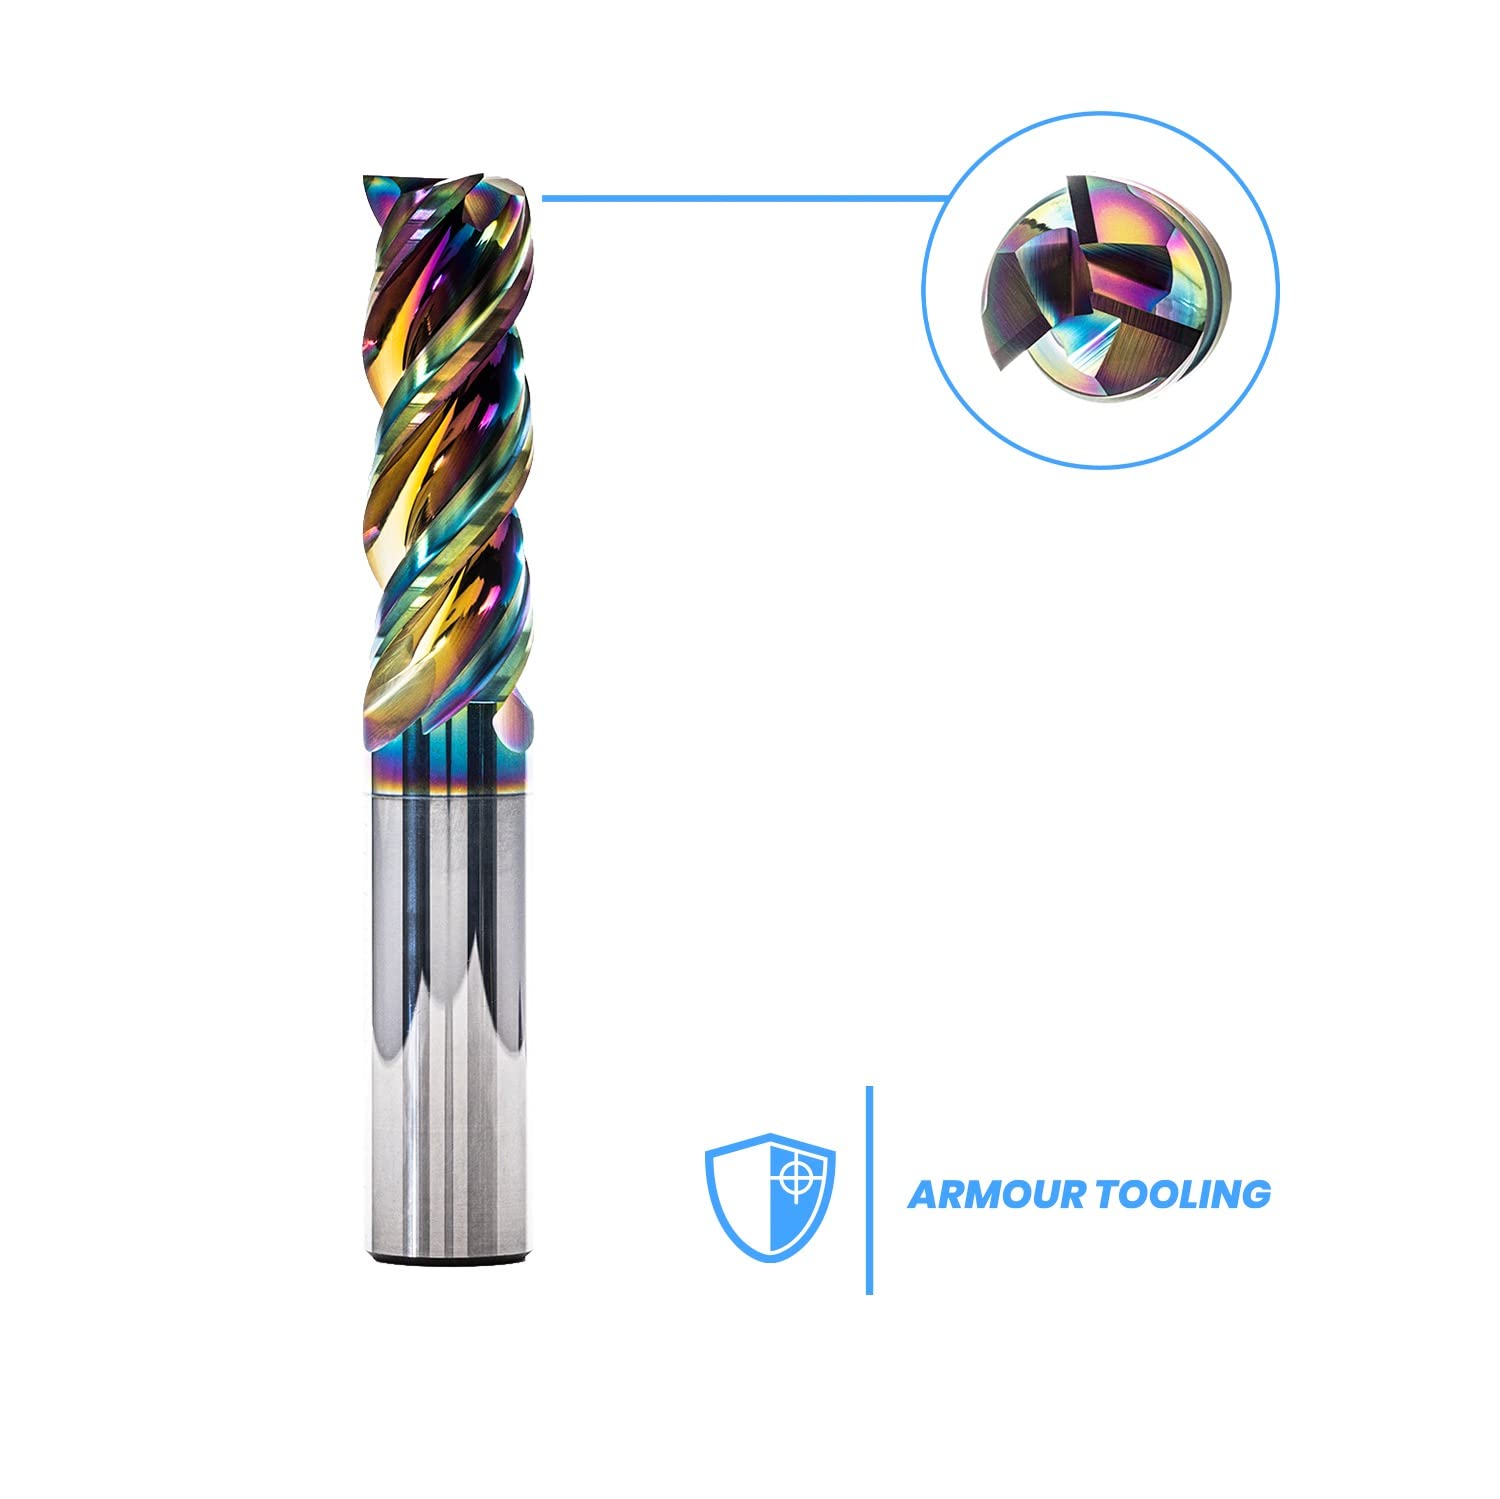 ARMOUR TOOLING - 8mm Tungsten Carbide End mill Bit - 3 Flute Sharp Corner Milling Cutter DLC coated - CNC Milling Tool - For Aluminium Roughing & Finishing